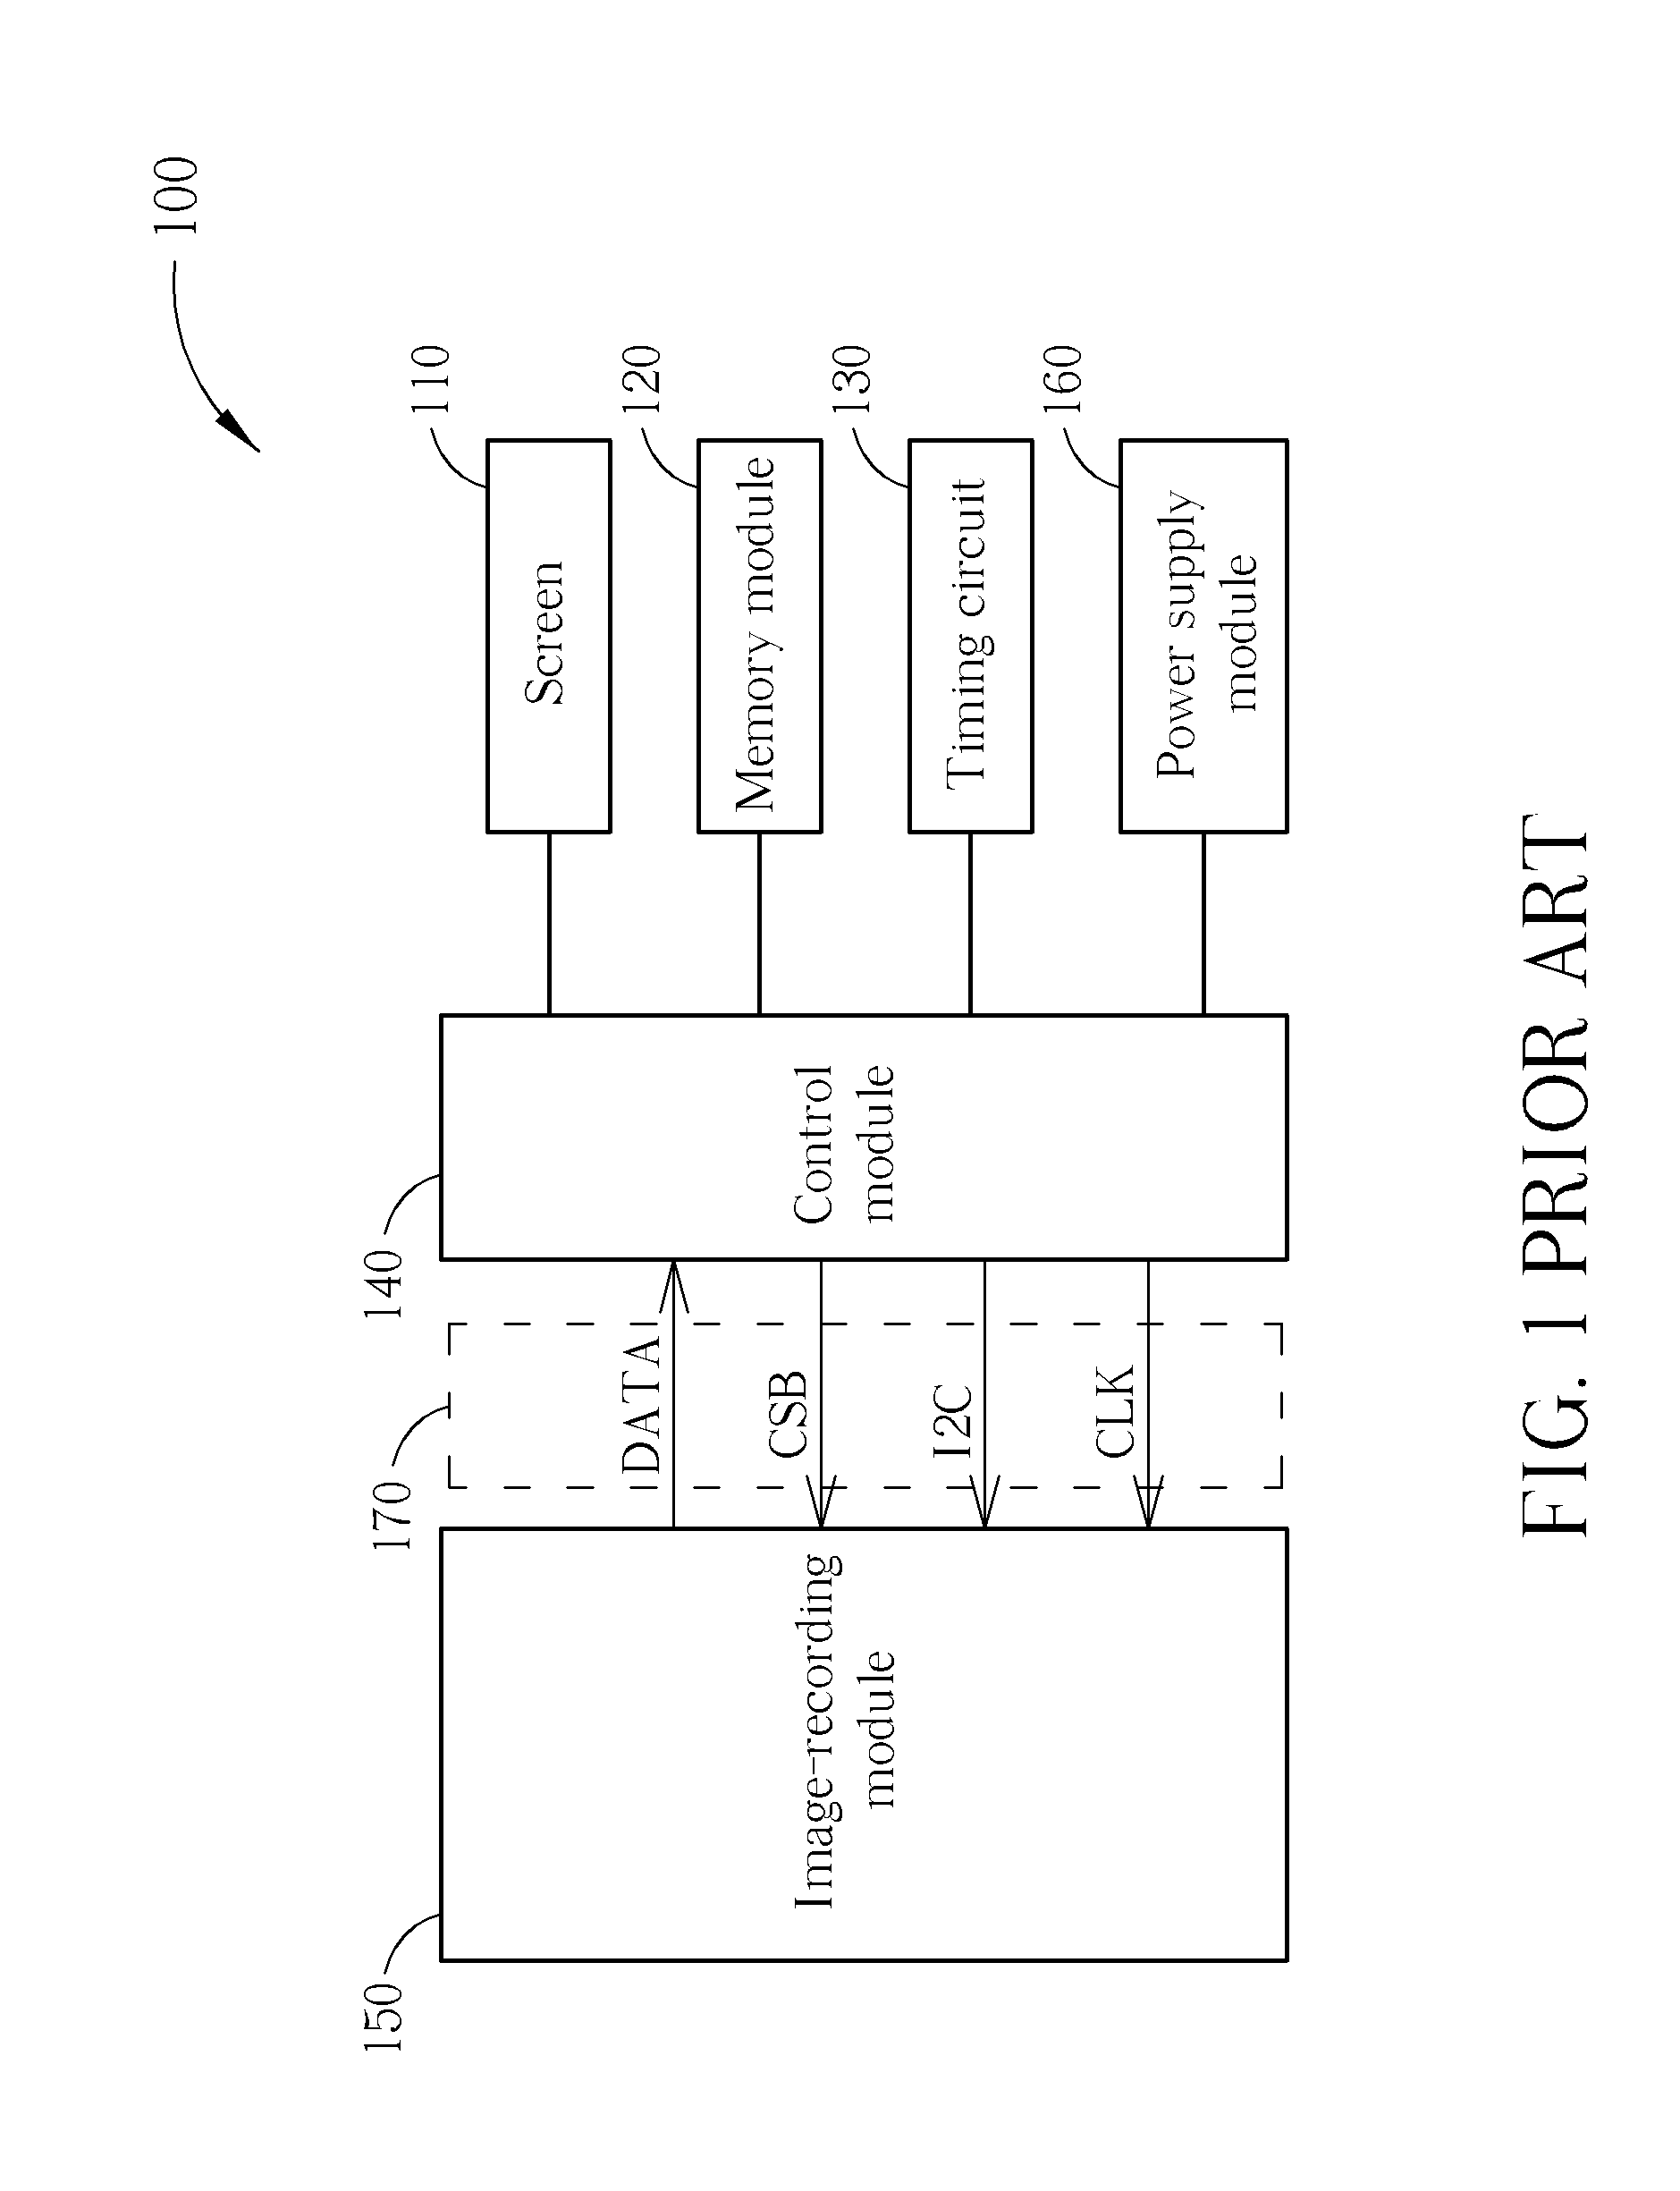 Event data recorder with low power consumption